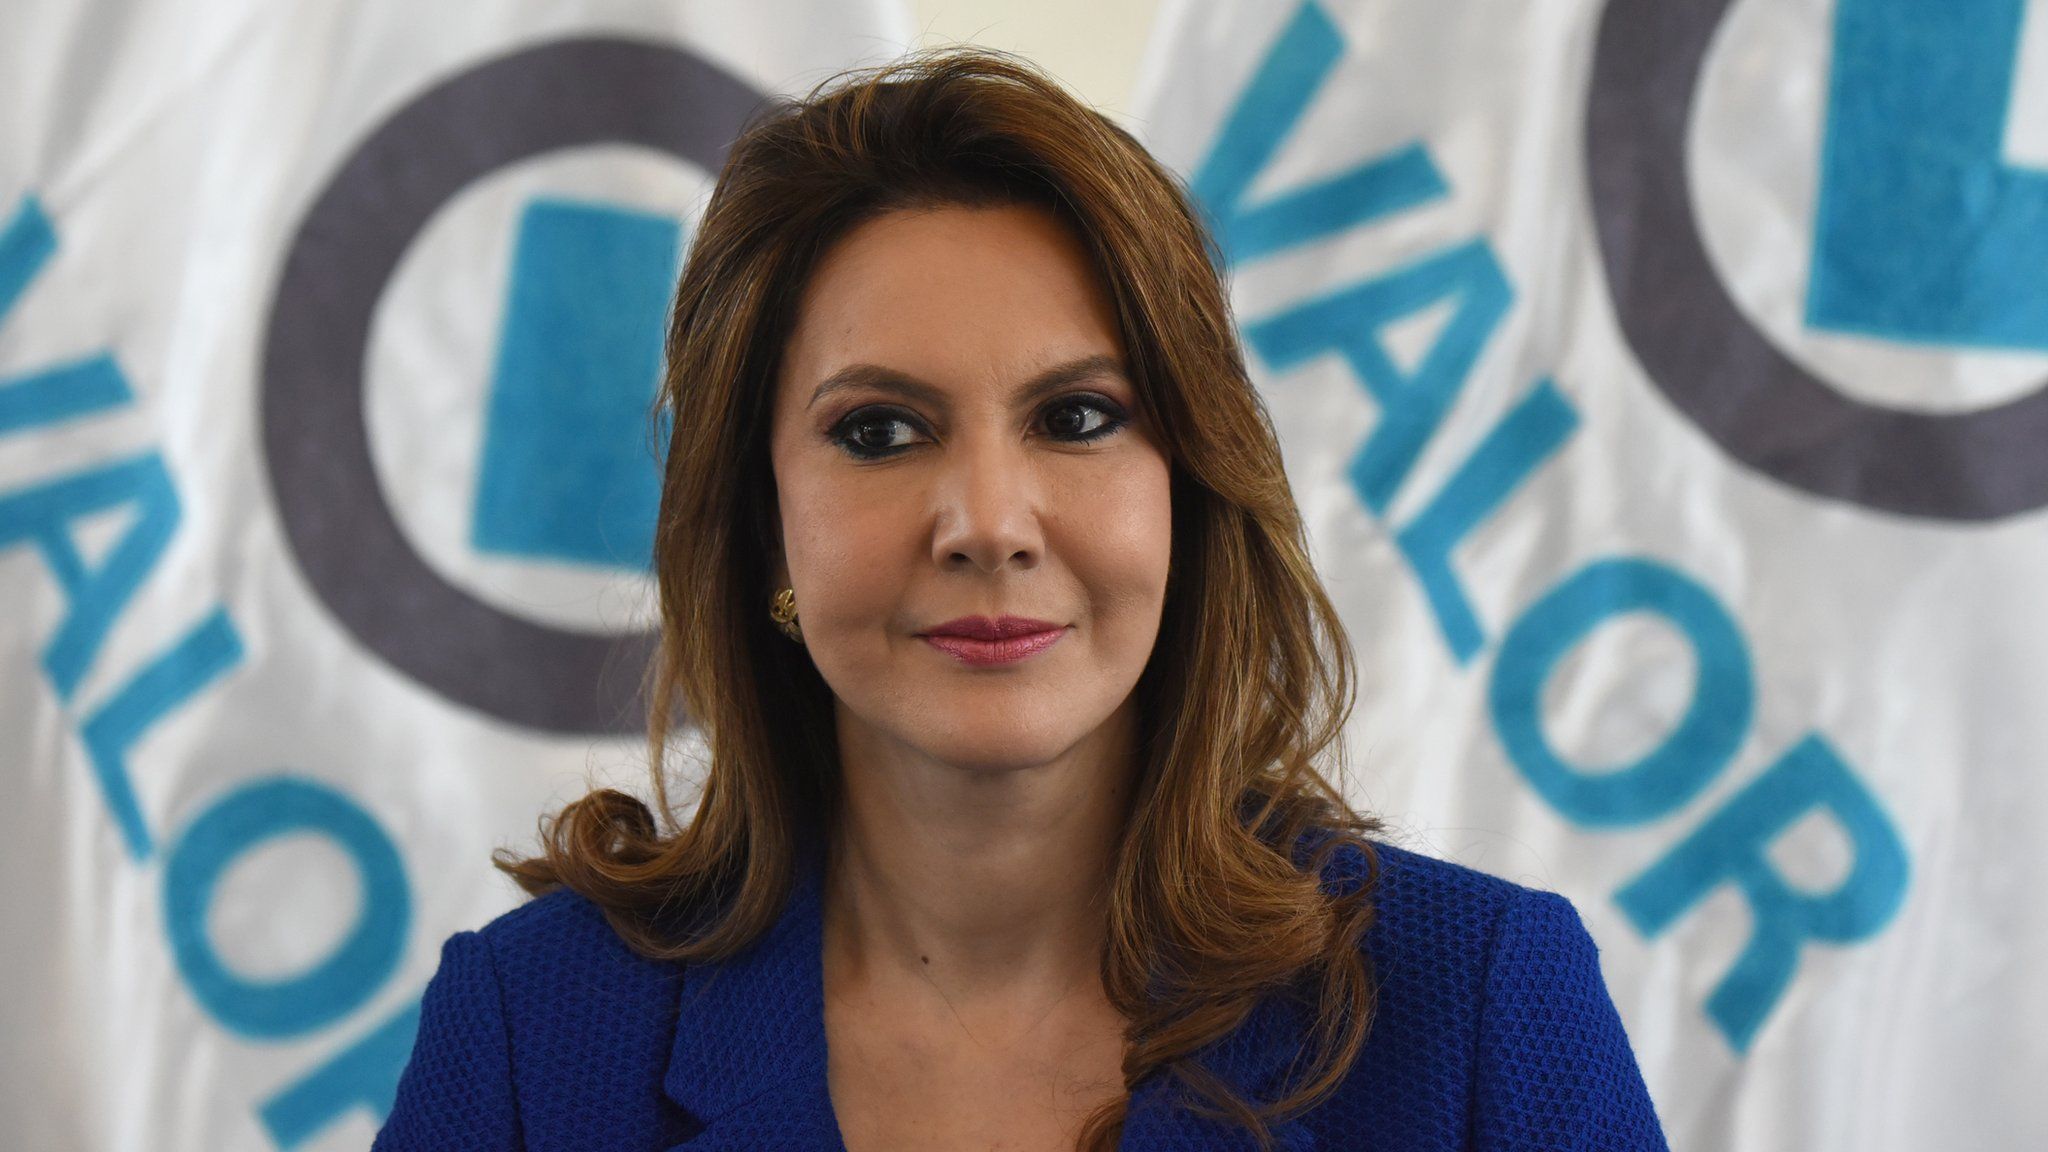 Zury Rios during a press conference in Guatemala City on March 13, 2019.